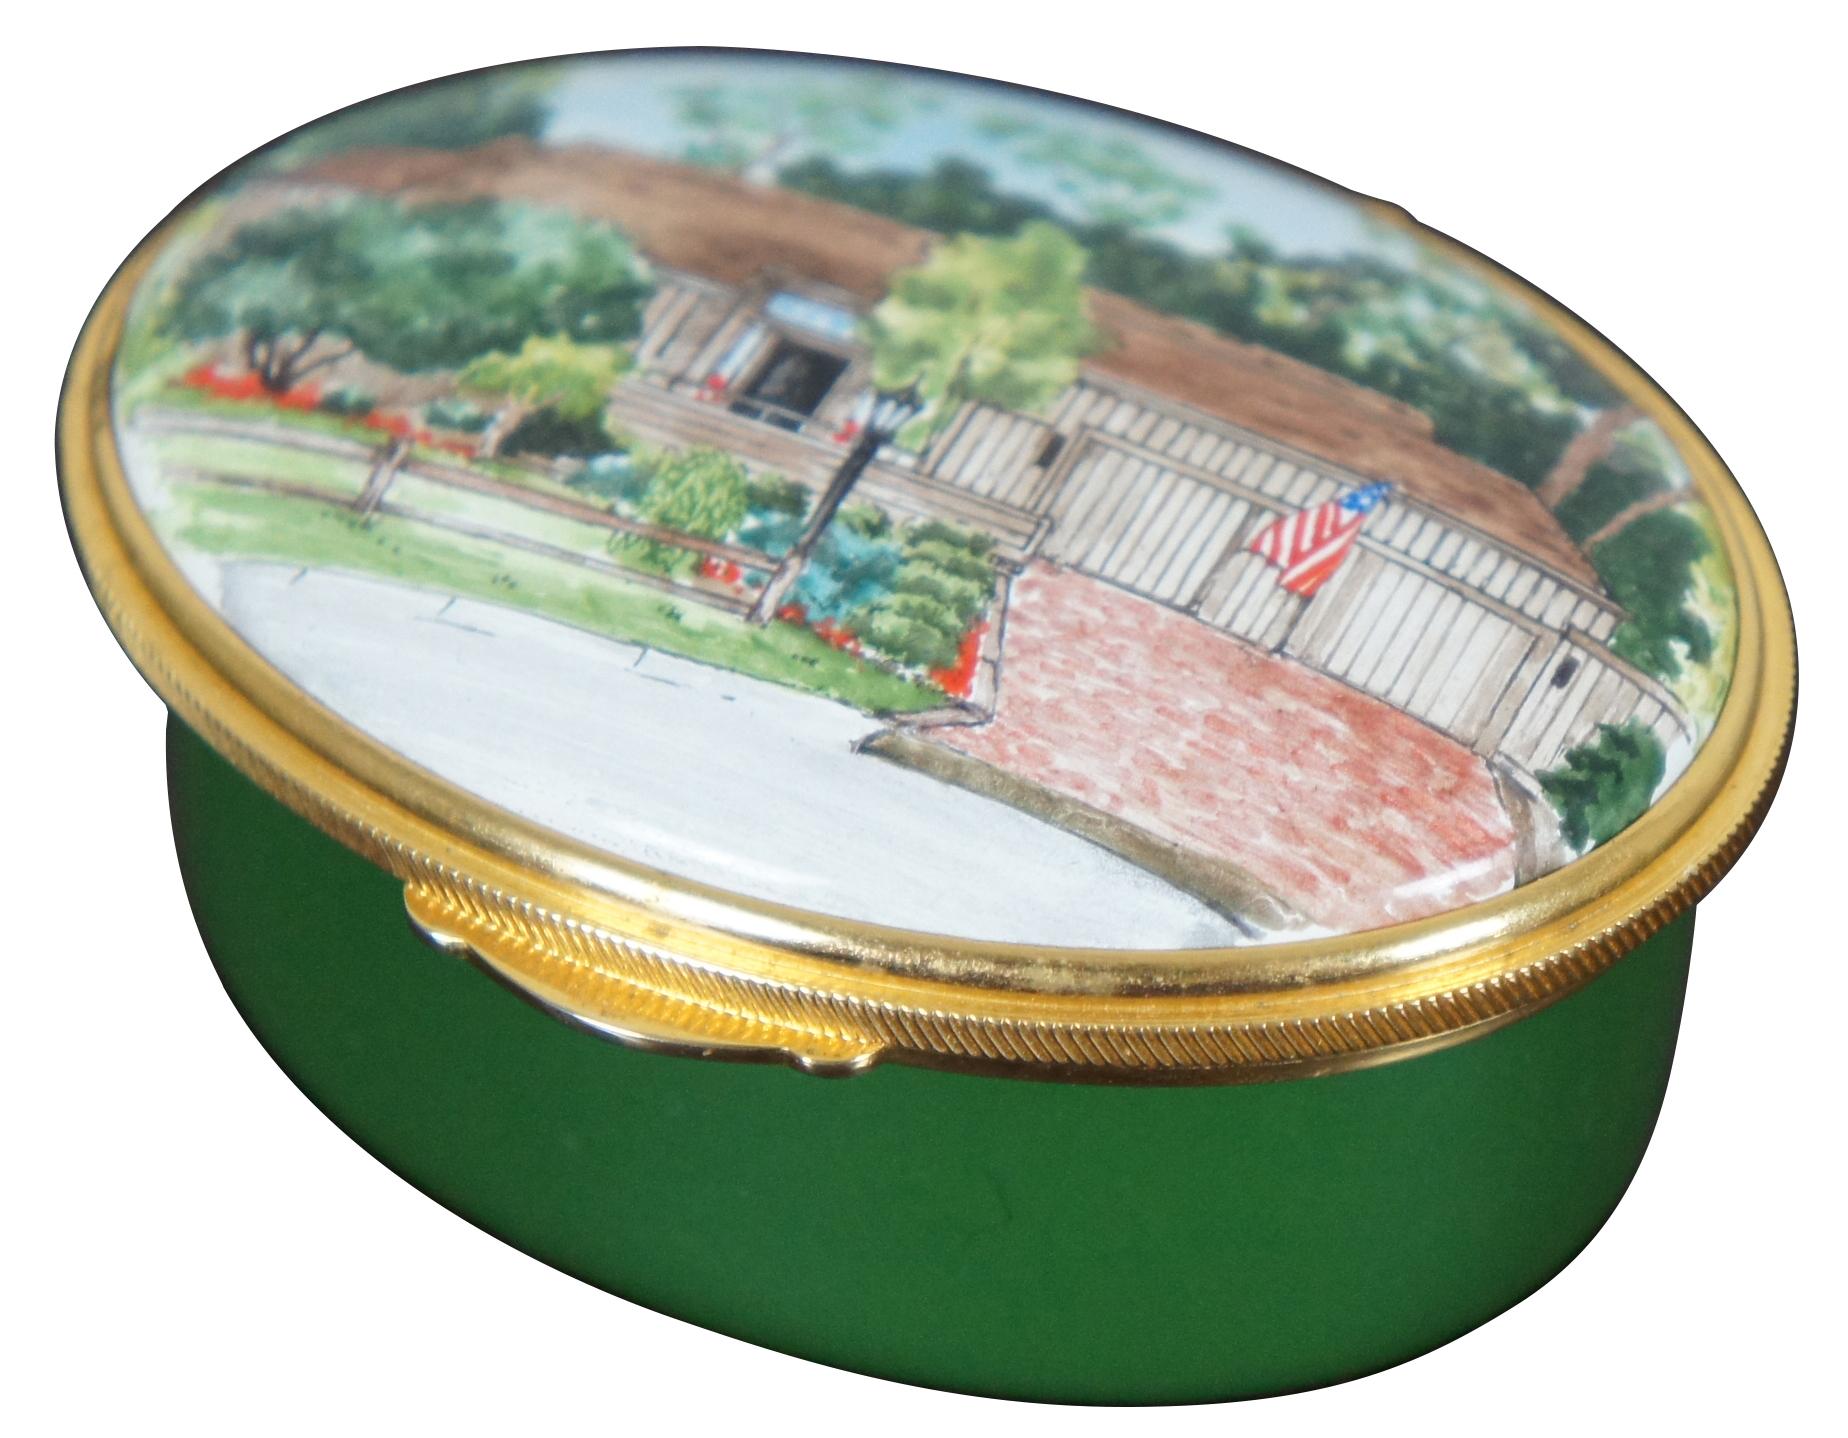 Vintage Eximious Ltd London oval porcelain trinket or pill box with green sides and painted with an American suburban house and the phrase “No Place Like Home” inside the lid. Excellent, distinguished, eminent. Peacock symbol. Made in England.
  